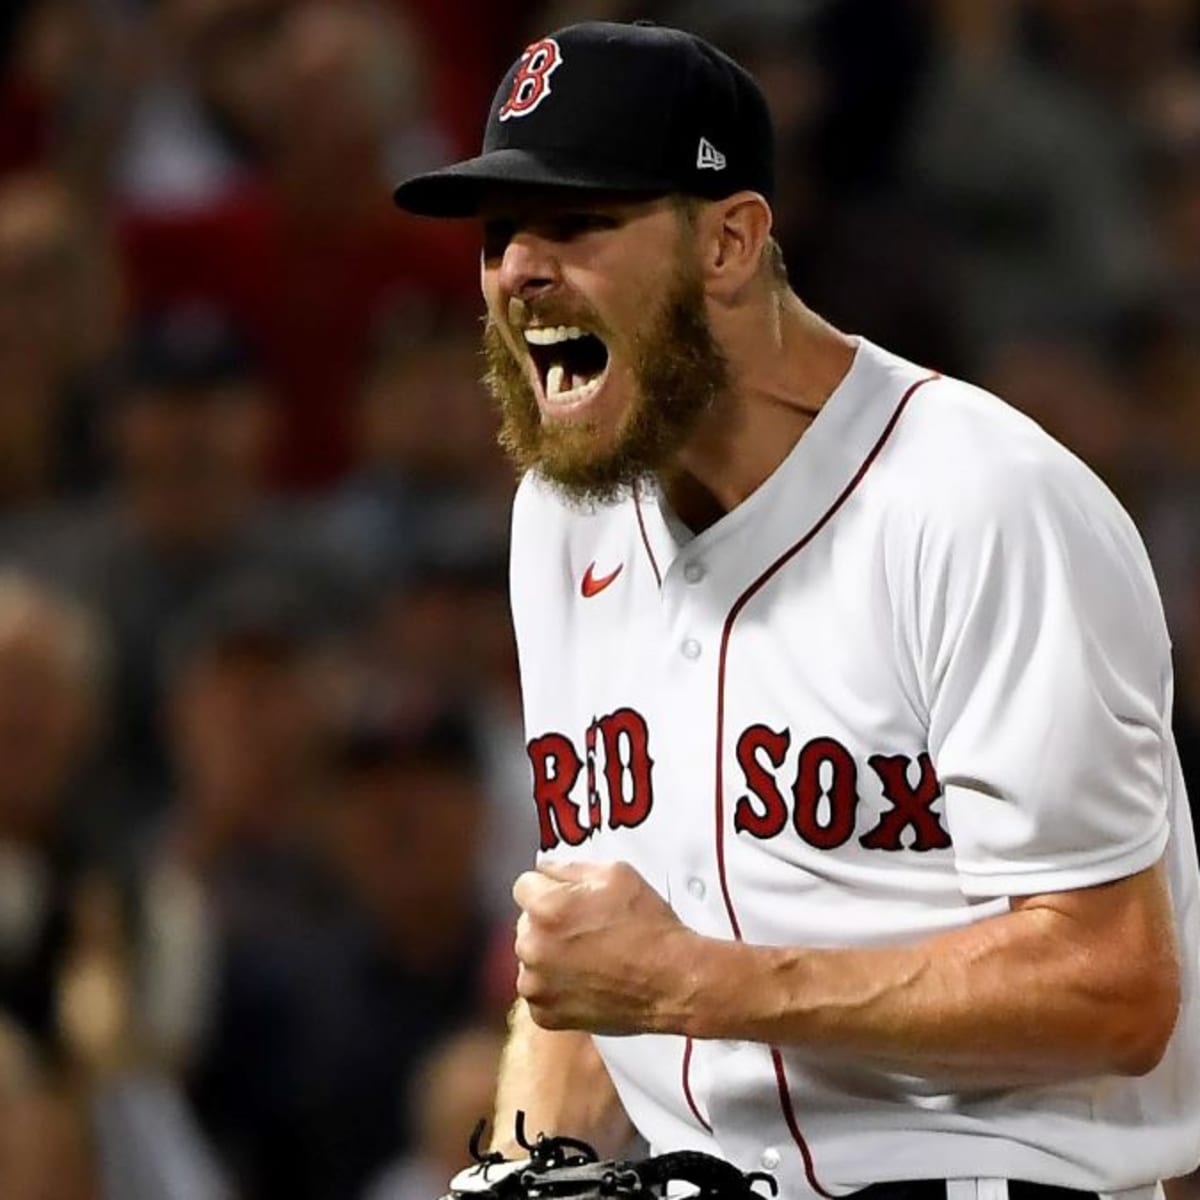 Chris Sale injury: How Red Sox pitcher fared in 1st rehab start 